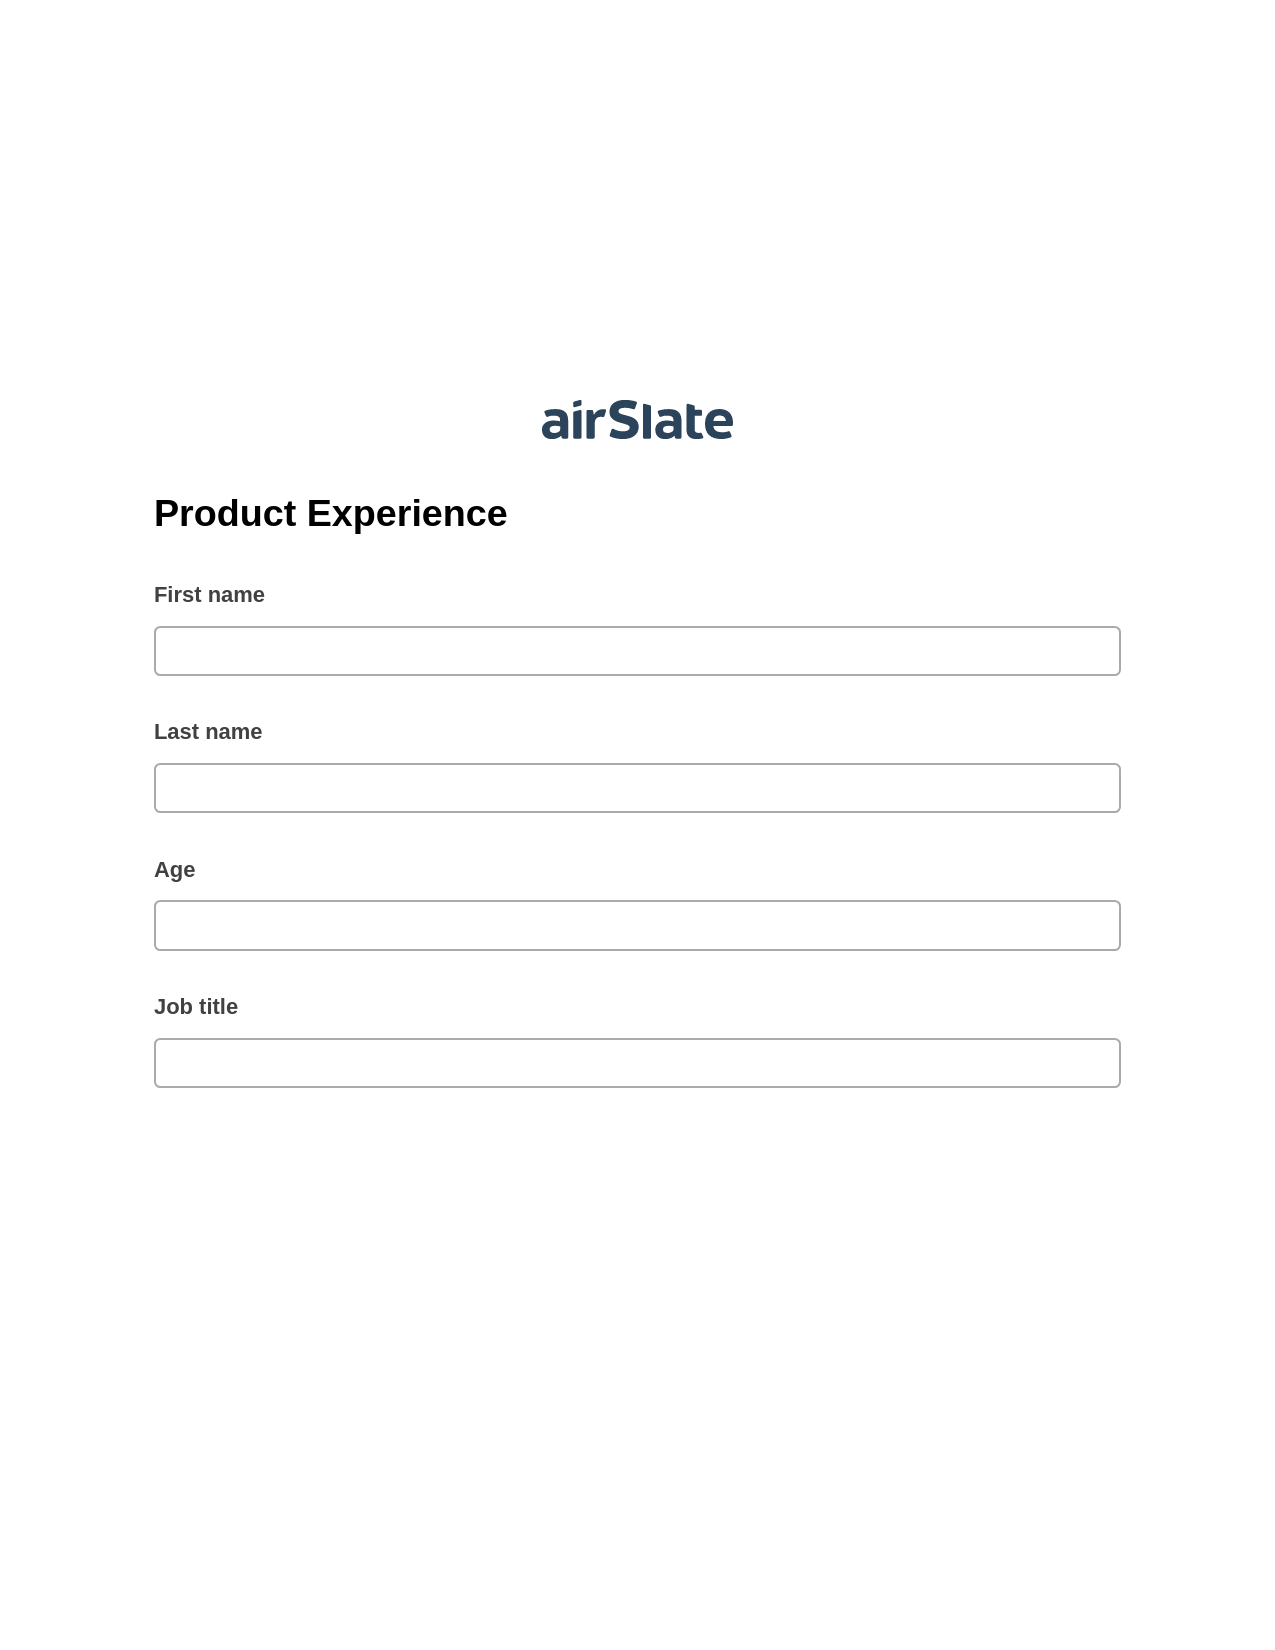 Product Experience Pre-fill from CSV File Bot, Send a Slate with Roles Bot, Export to MySQL Bot